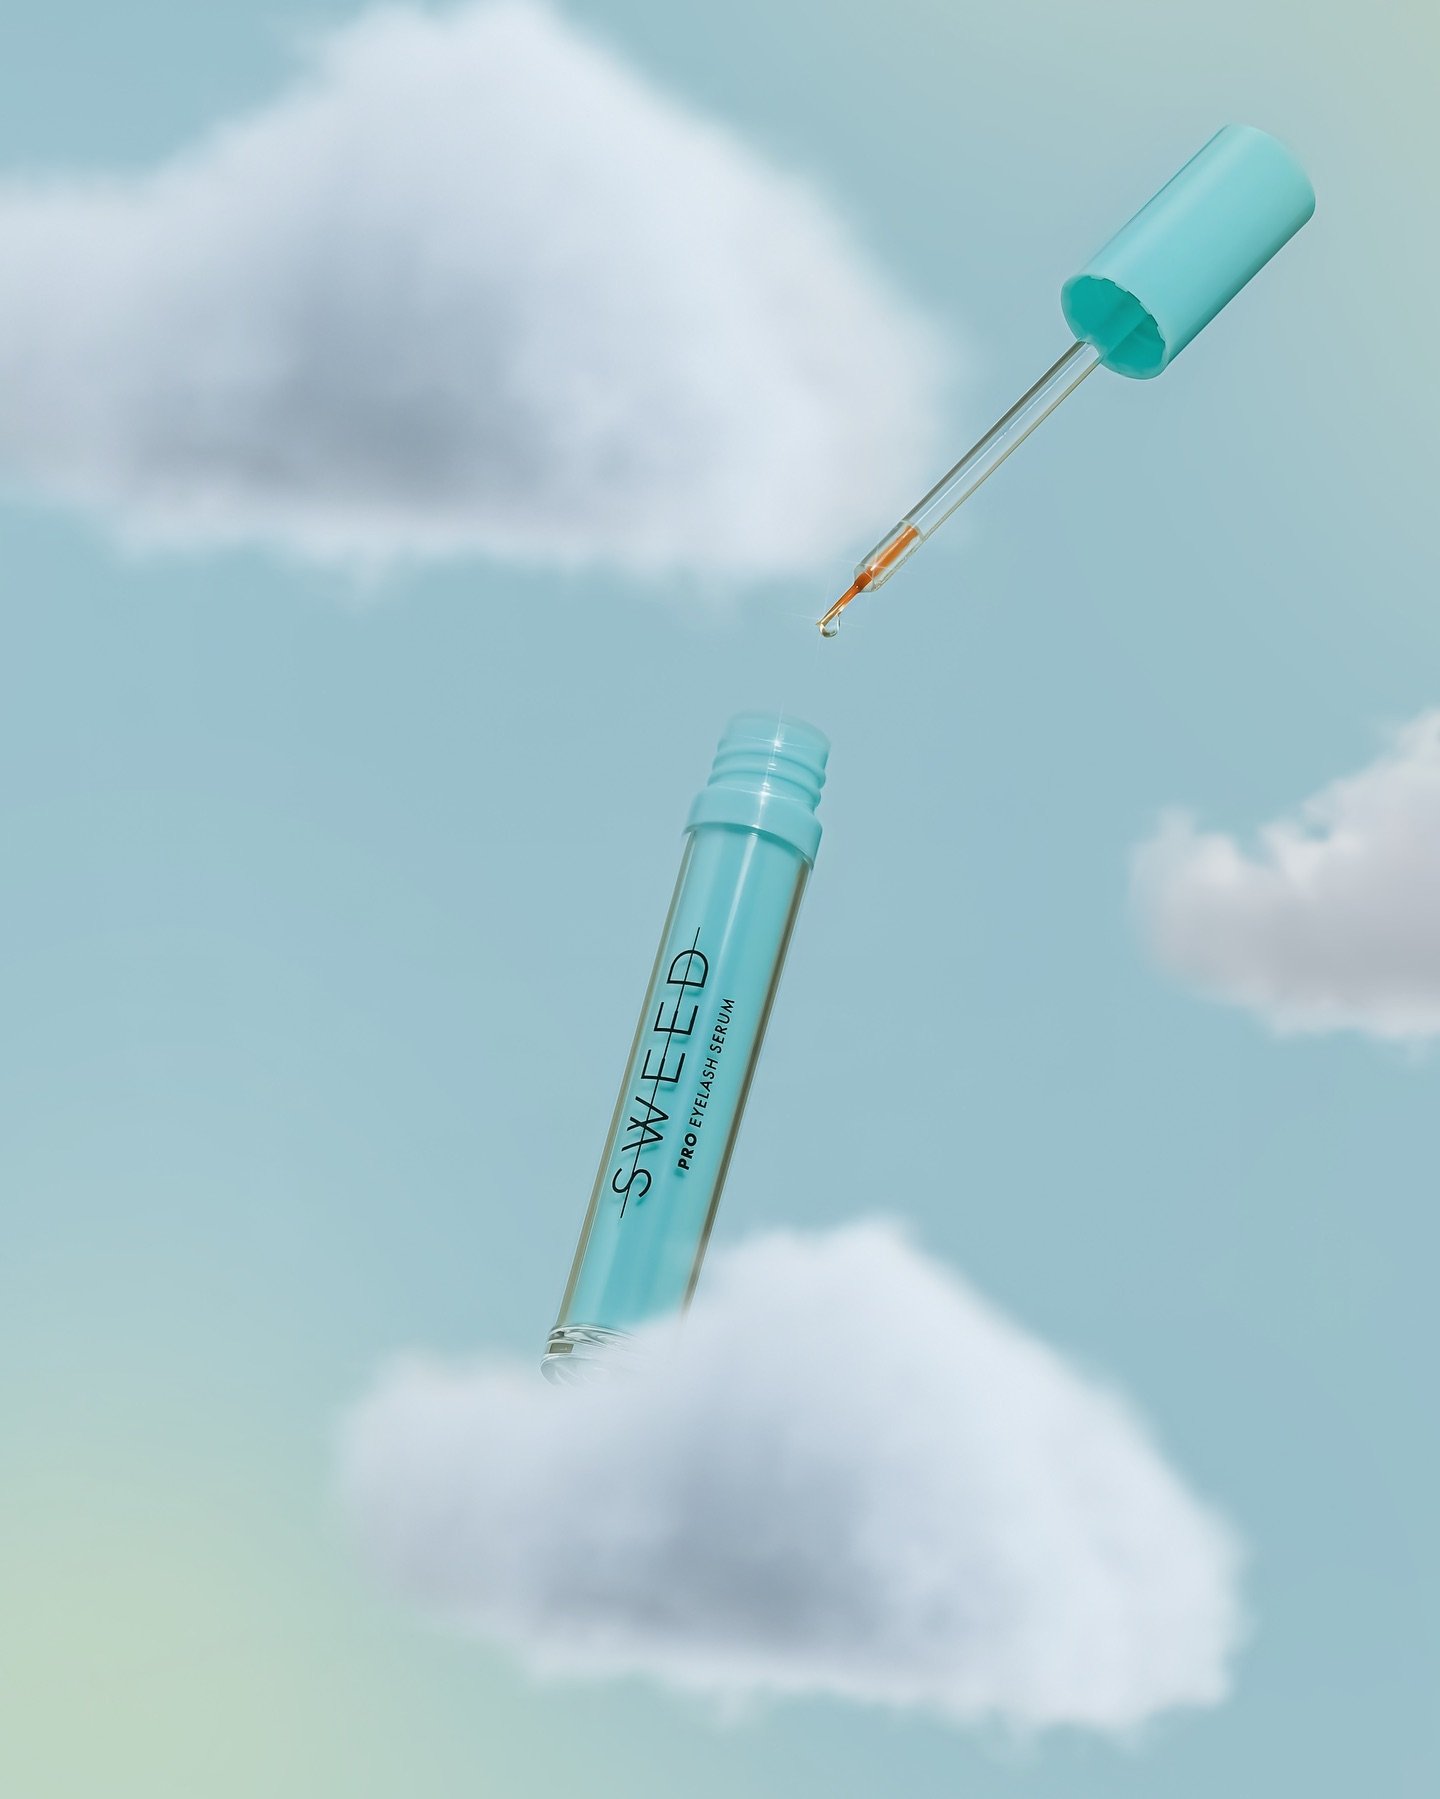 On cloud nine ☁️ 

In frame: @sweedbeauty Eyelash Growth Serum

☁️ Helps both length and thickness 
☁️ Prostaglandin-free (hormones that can cause irritation and leave a dark colour pigmentation along your lash line)
☁️ Contains peptides, biotin, pum